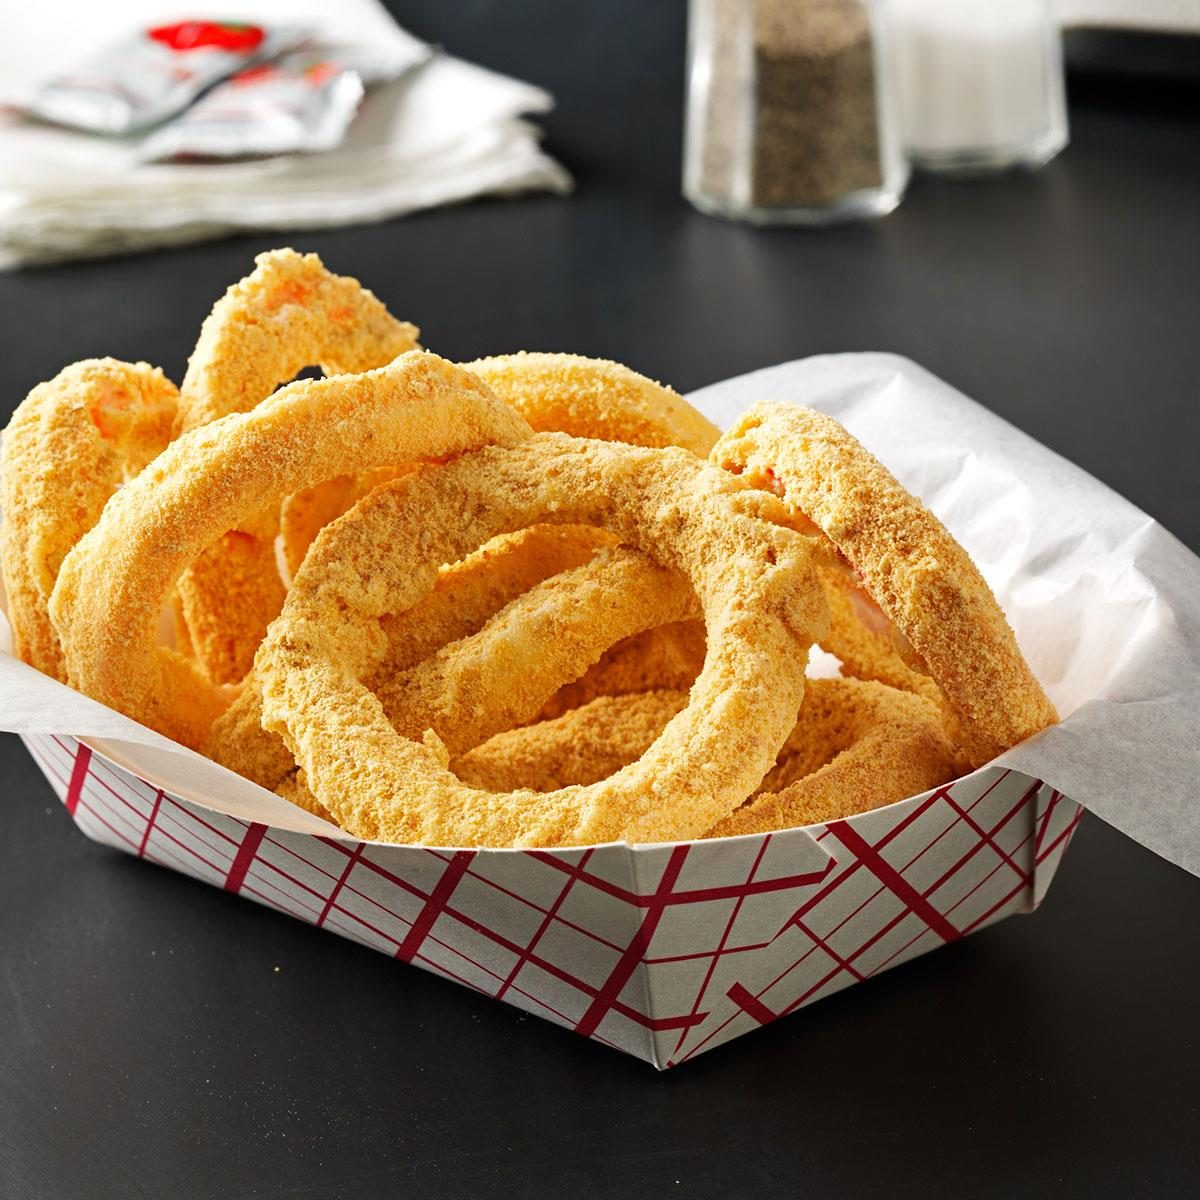 Candy "Onion" Rings